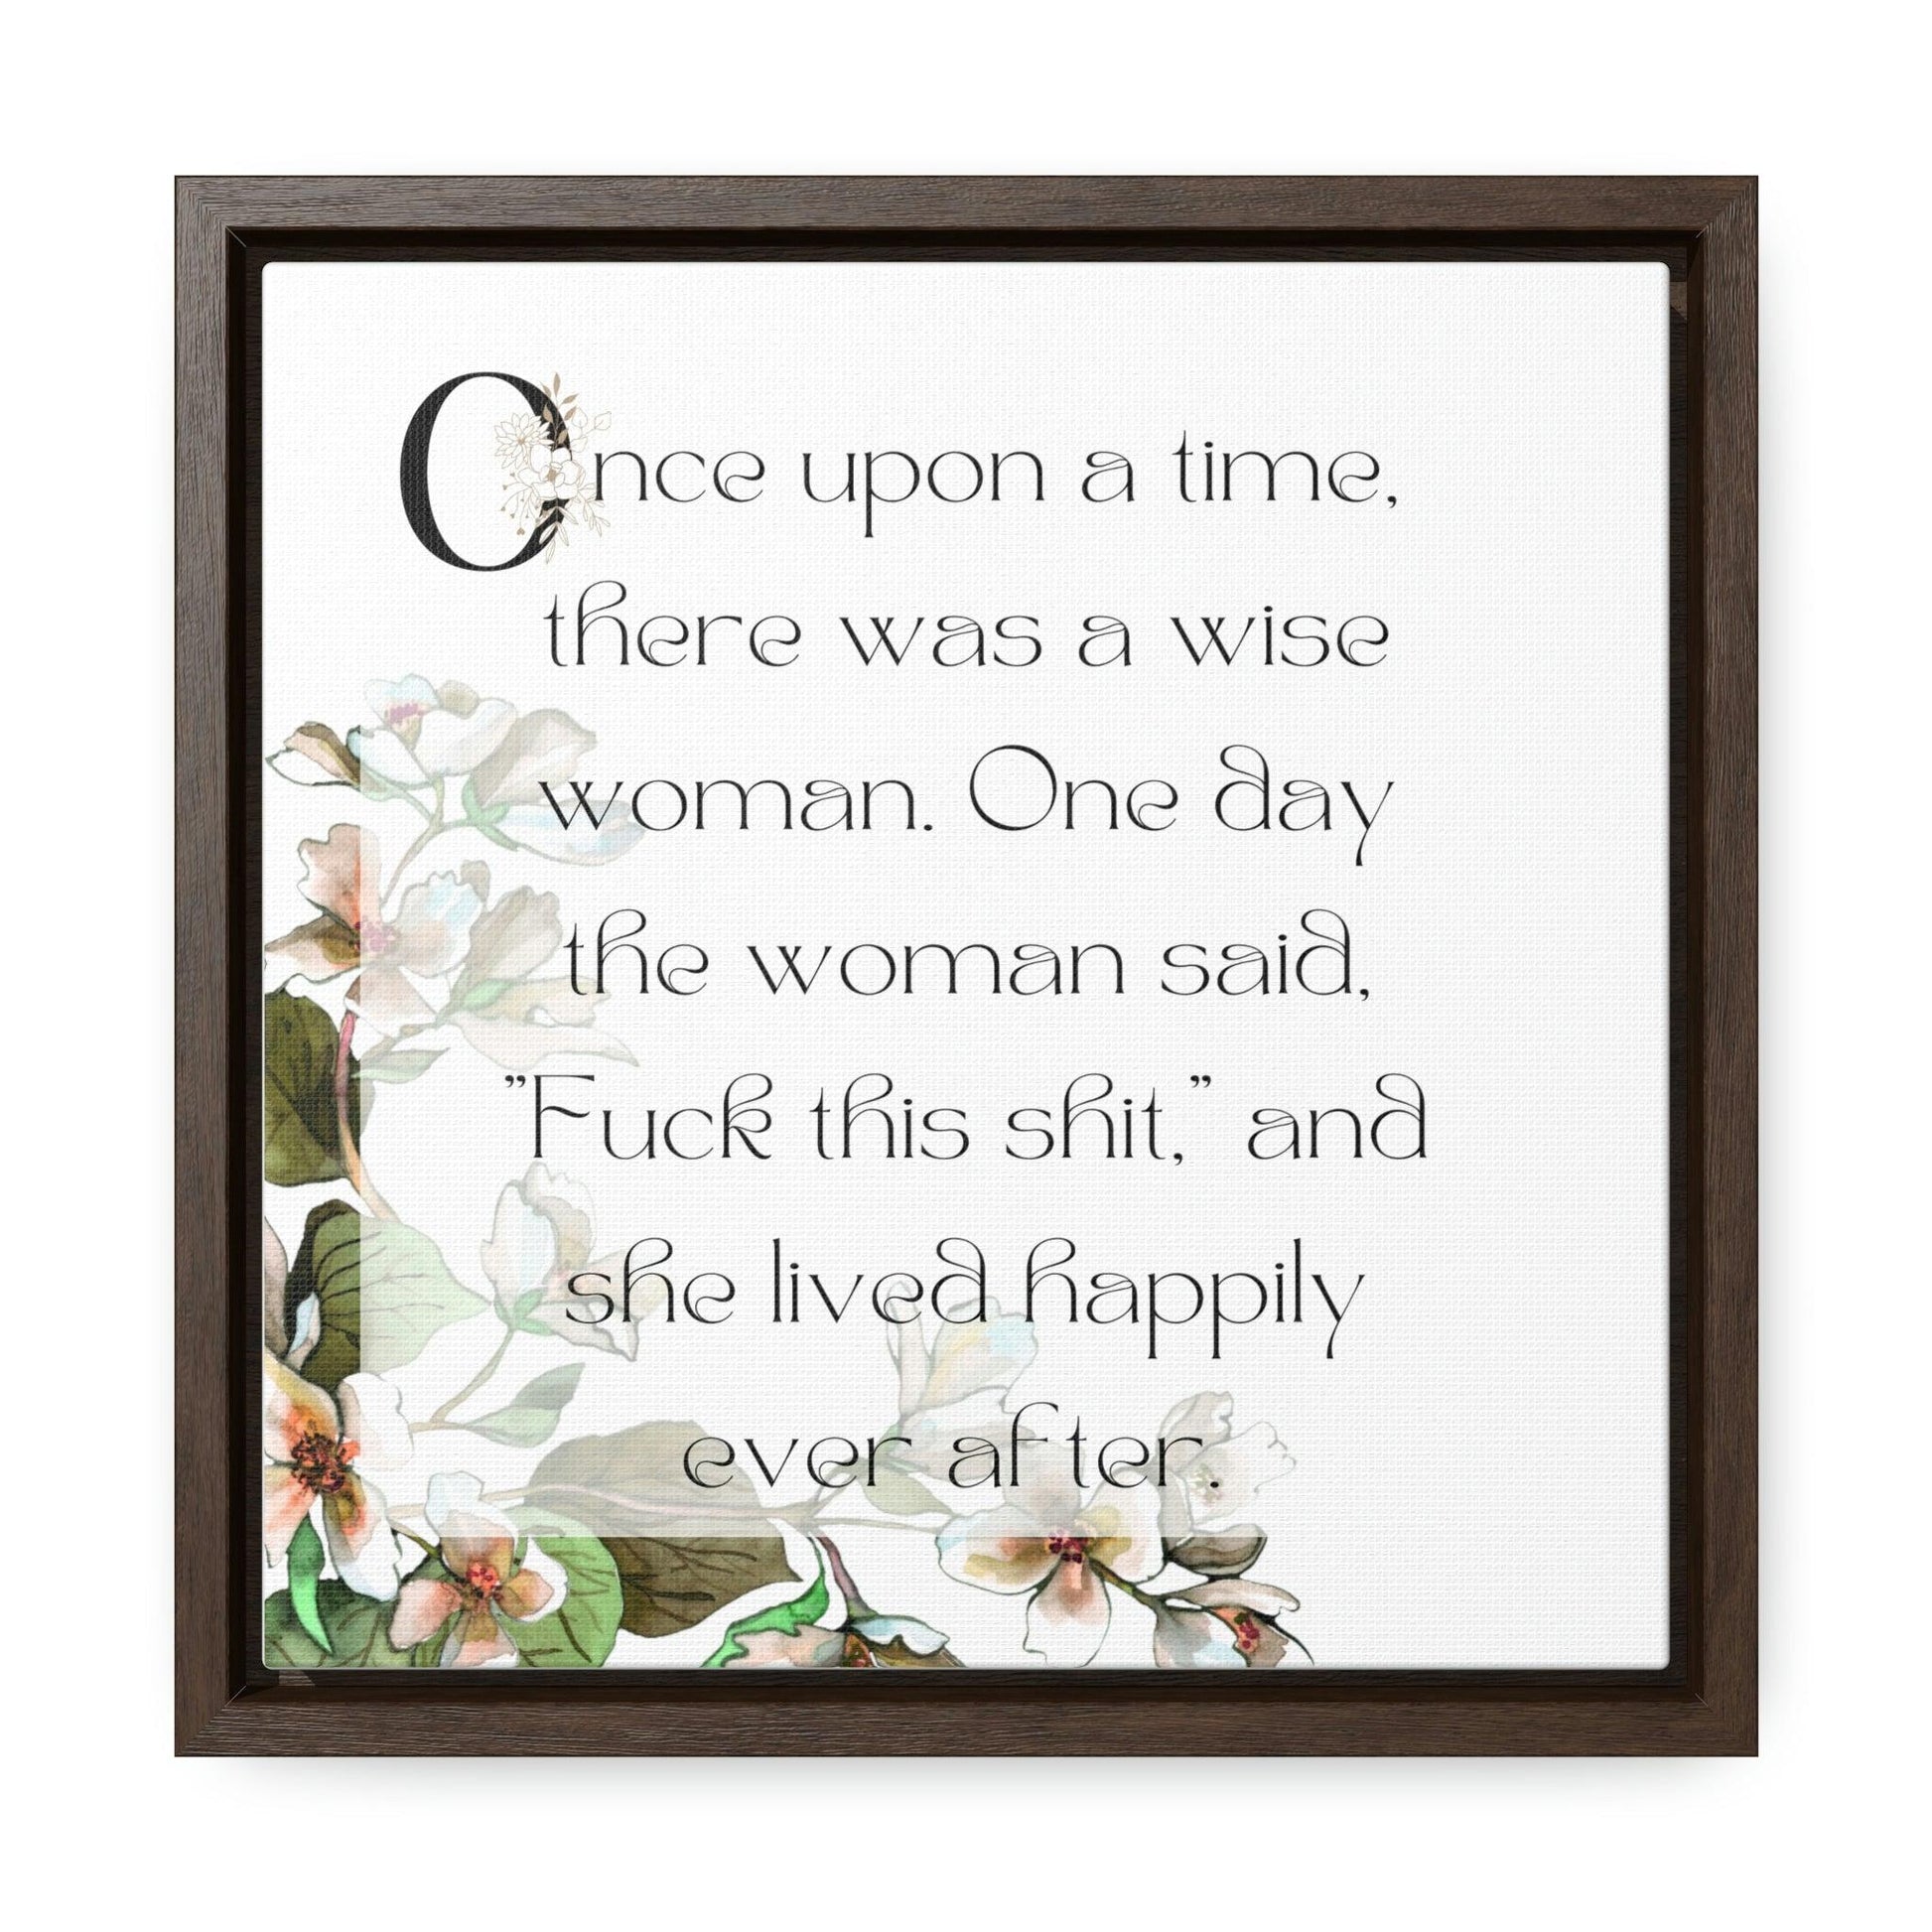 Once upon a time there was a wise woman - Gallery Canvas Wraps, Square Frame - Moxie Graphics